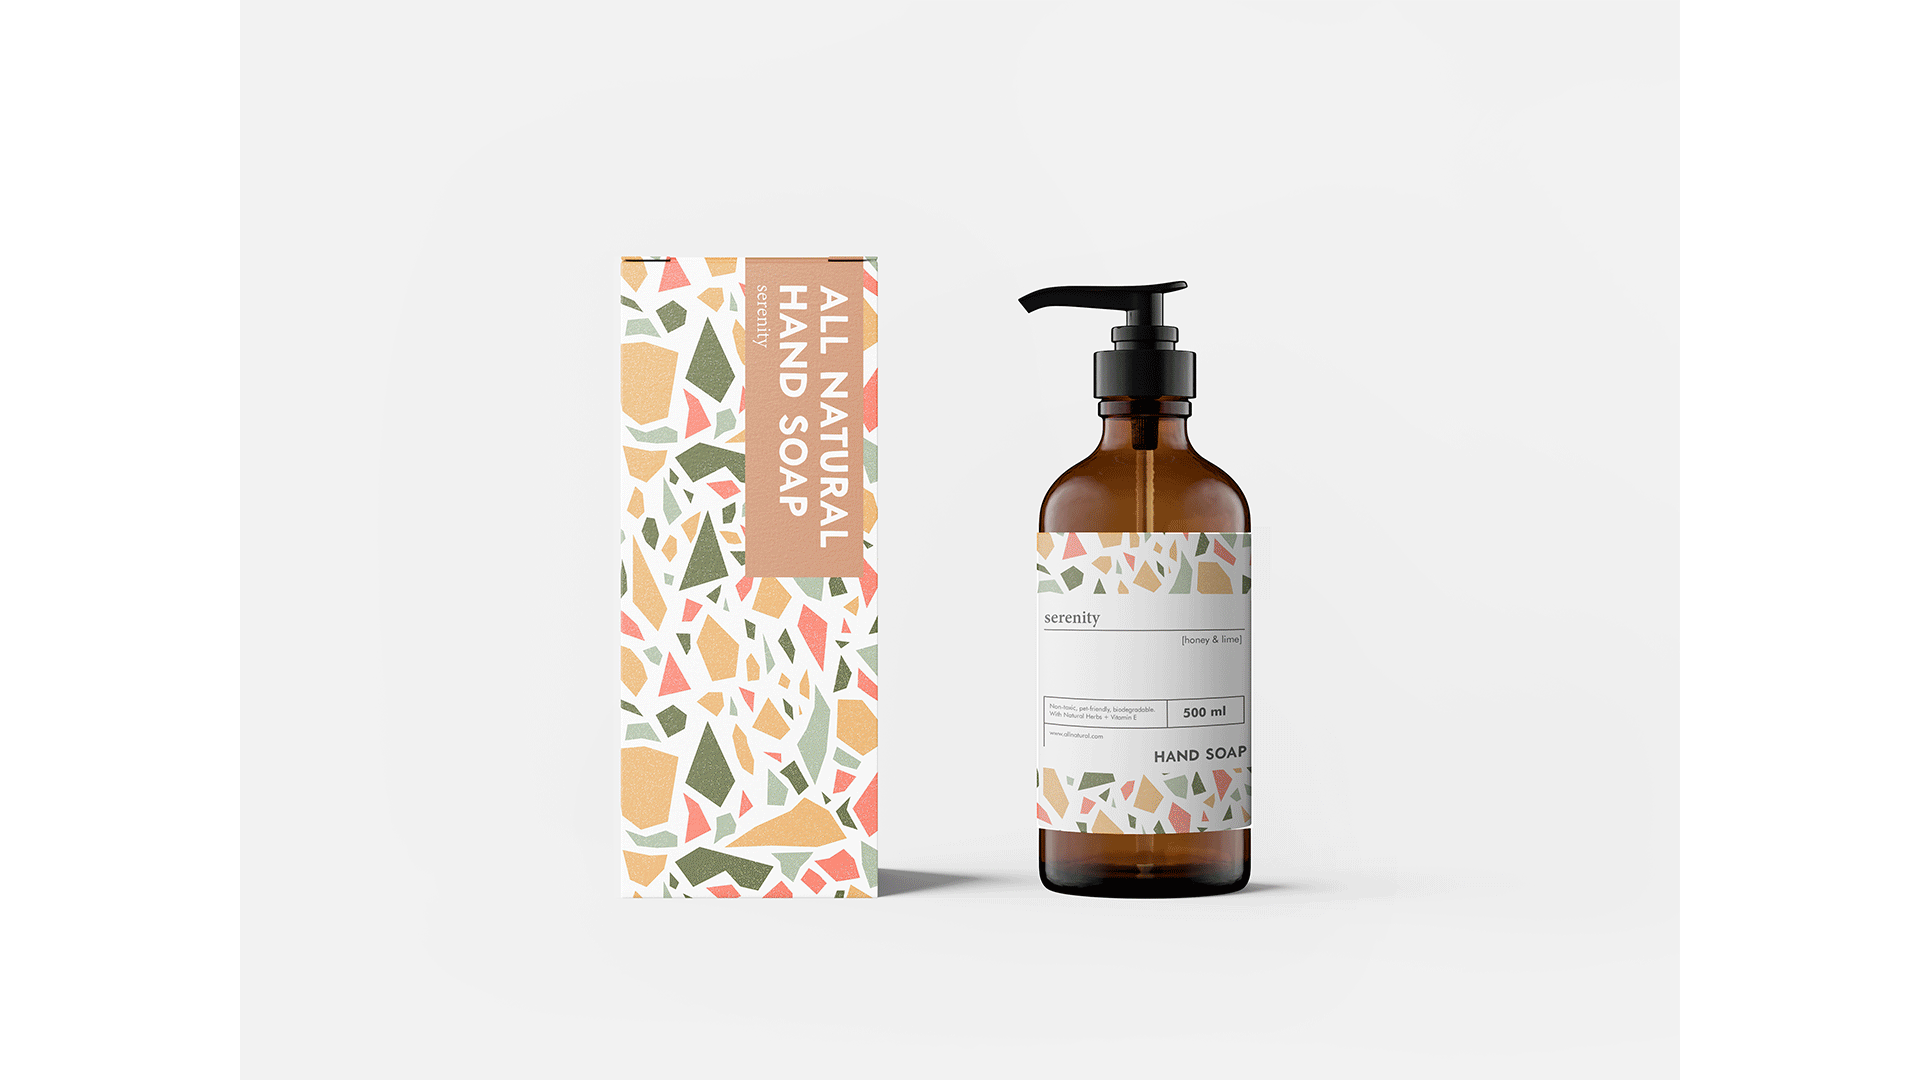 Hand Soap Packaging Design abstract bottle box design branding hand soap label design packaging design pattern design product design terazzo visual identity